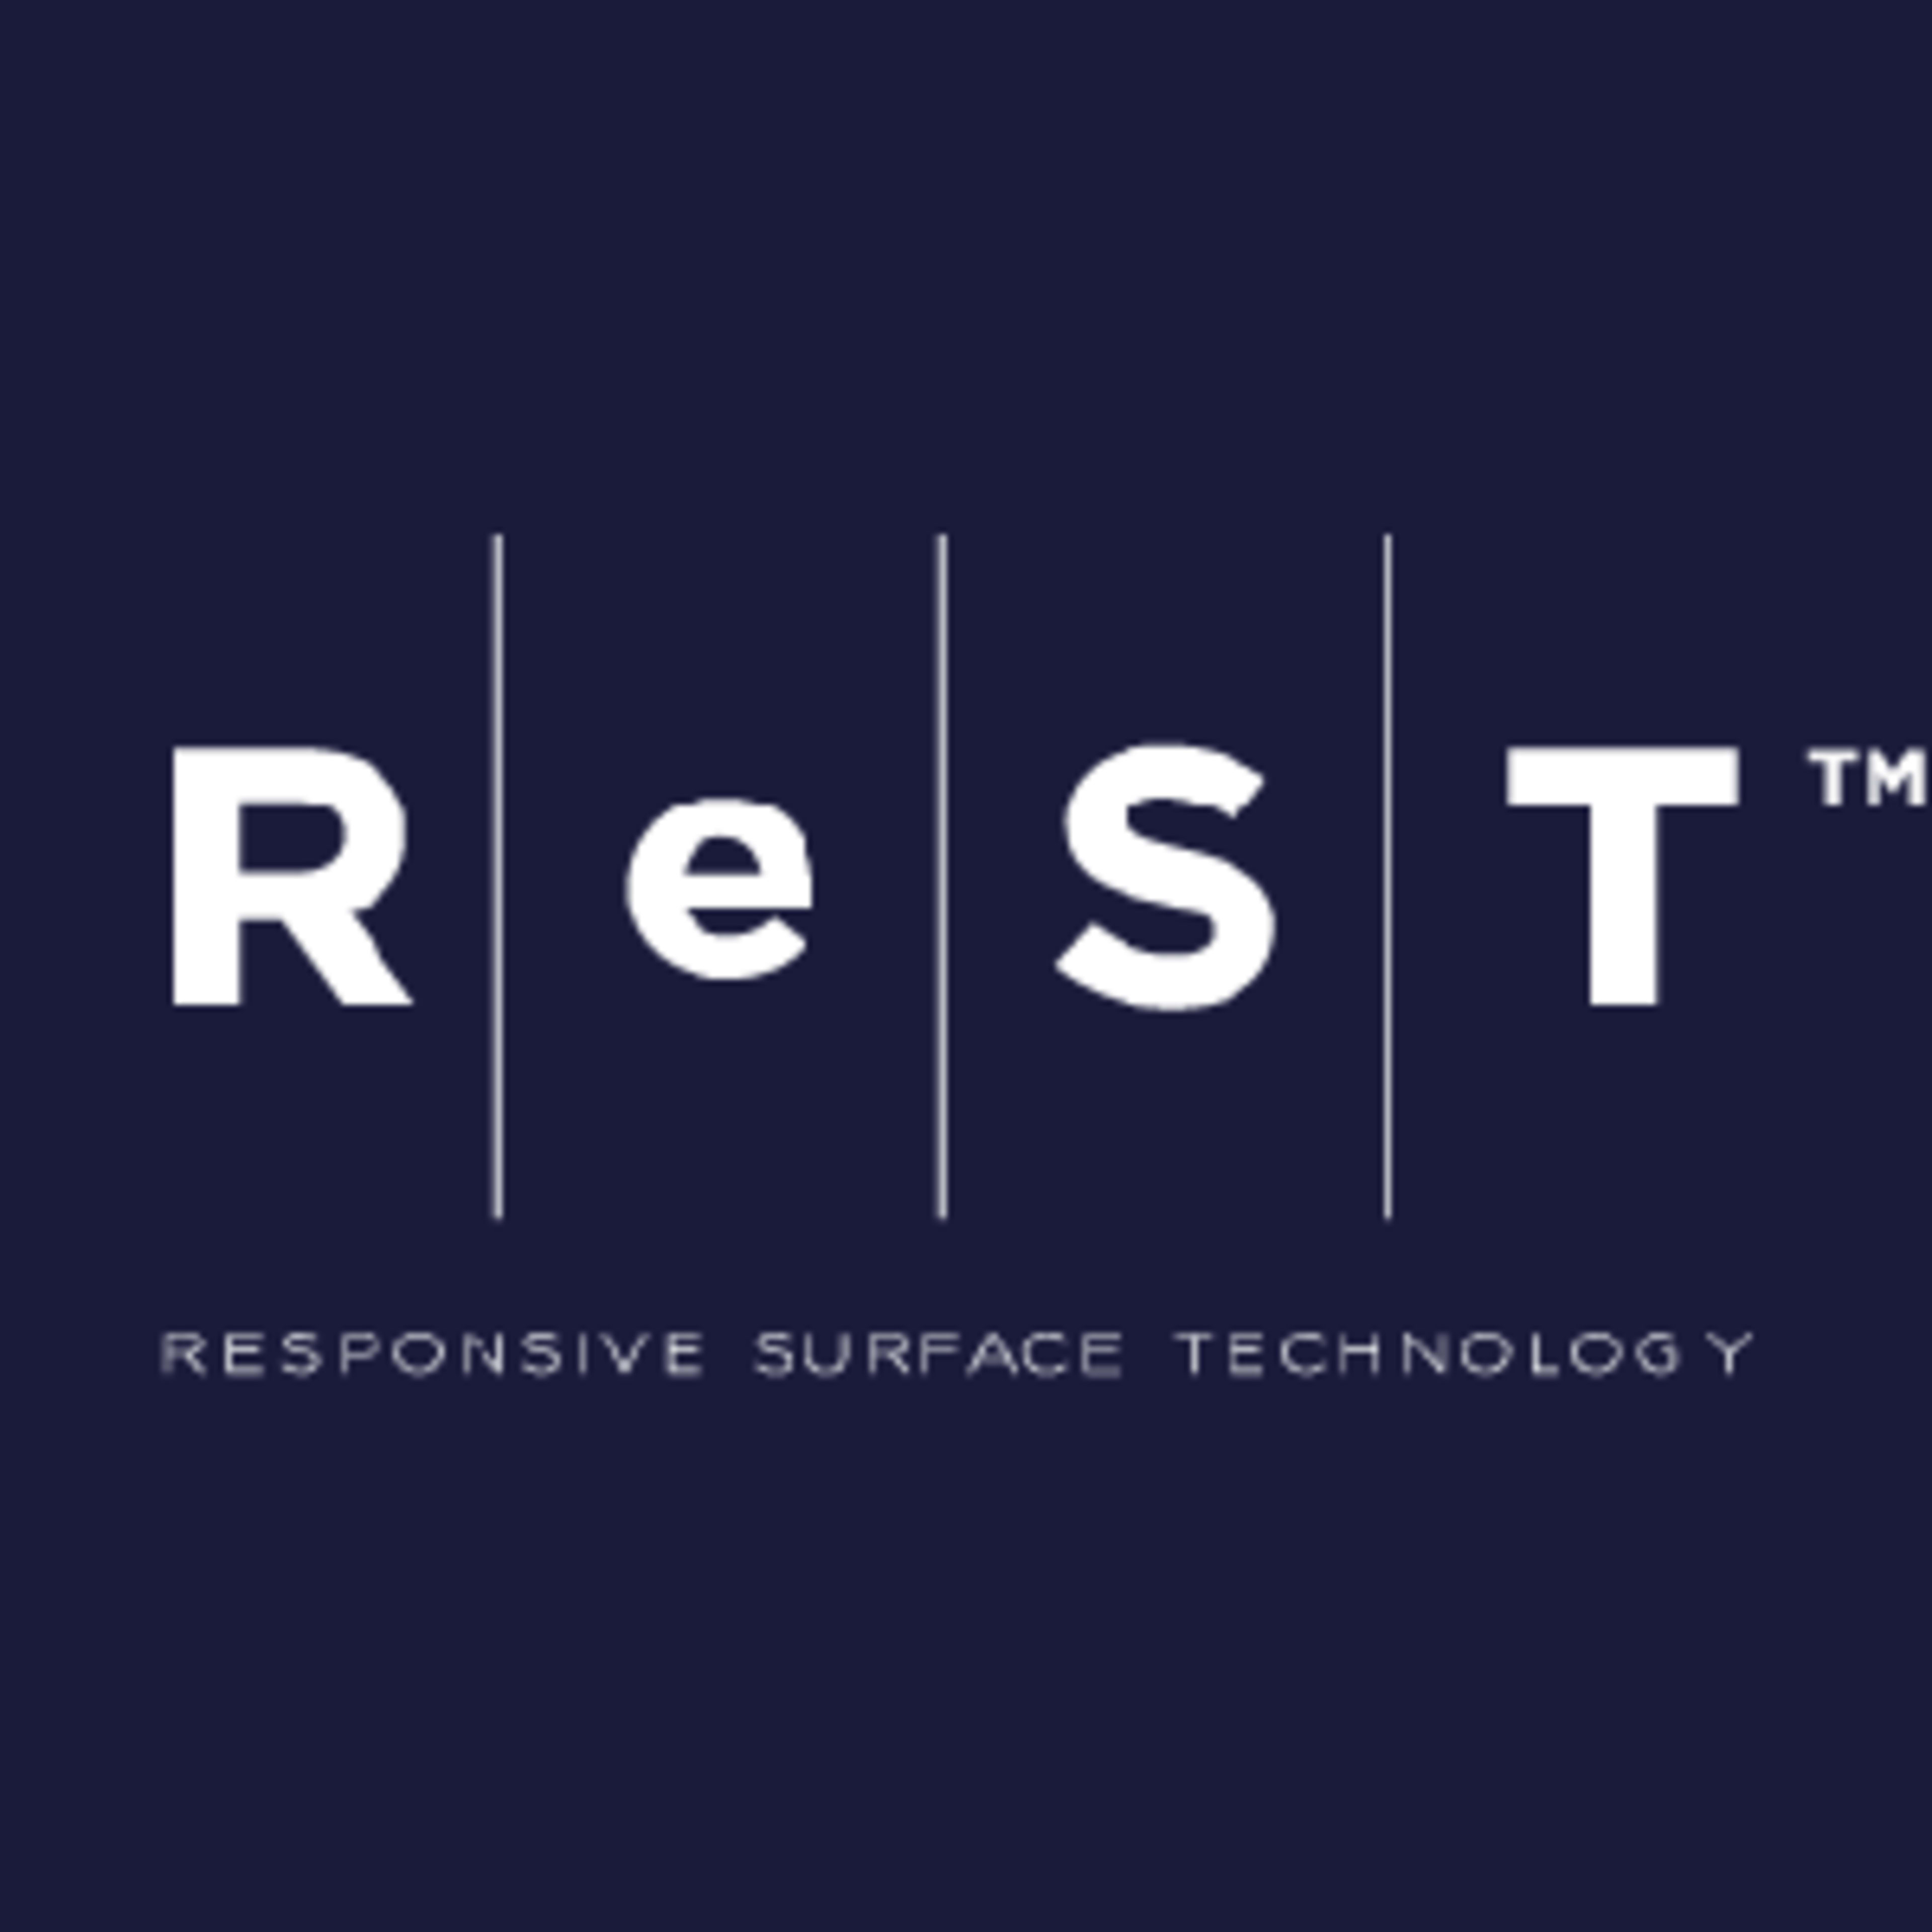 ReST - Responsive Surface Technology US Code